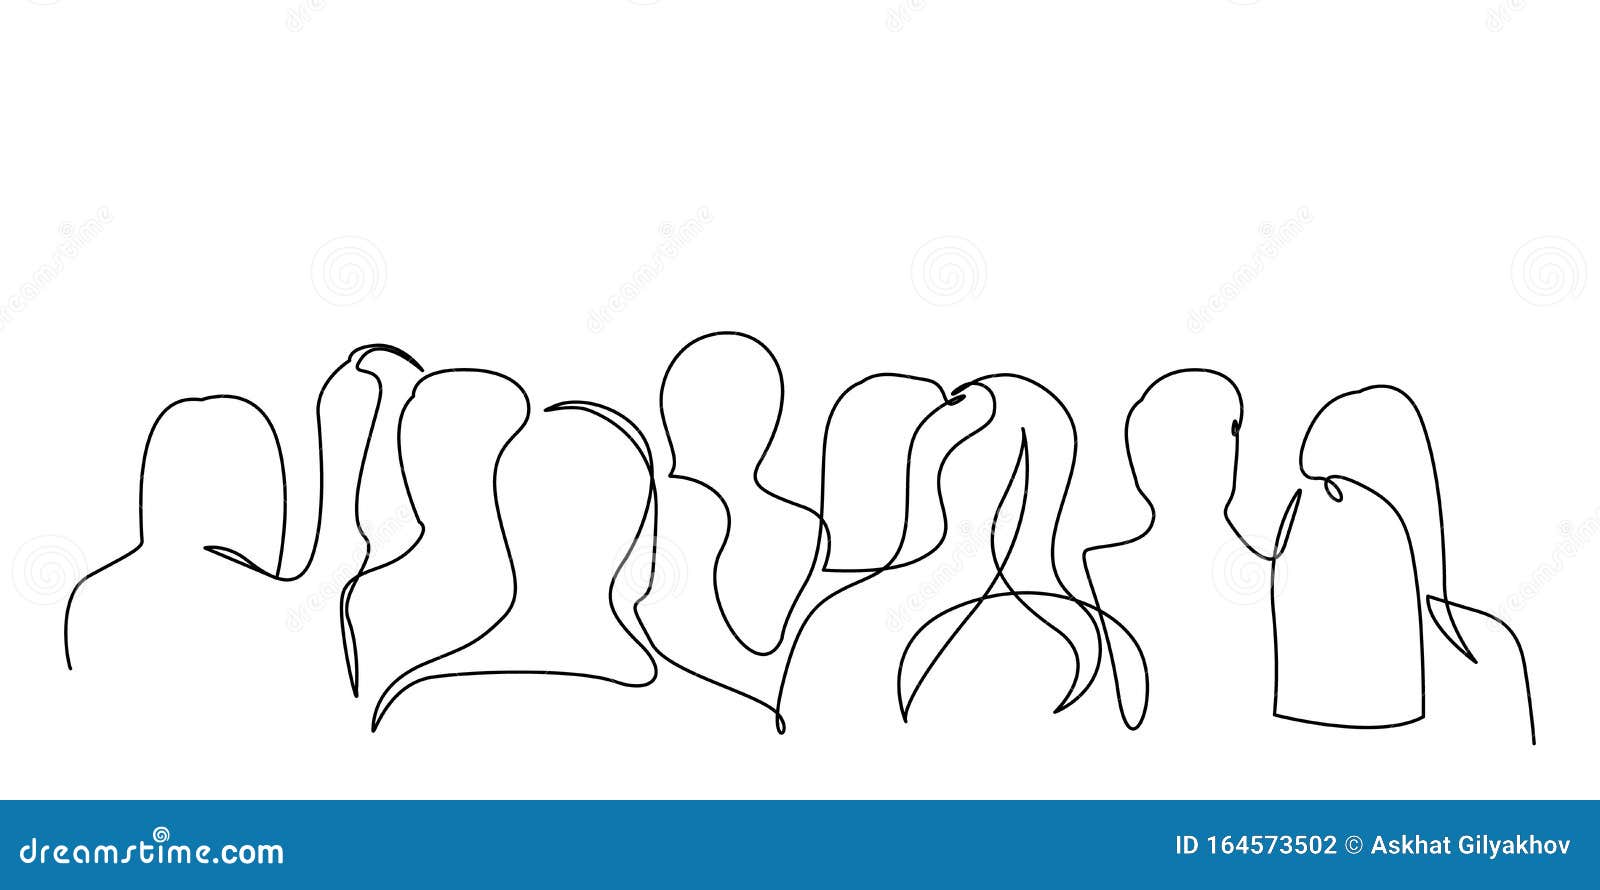 continuous one line silhouette of a crowd of people back view.  .